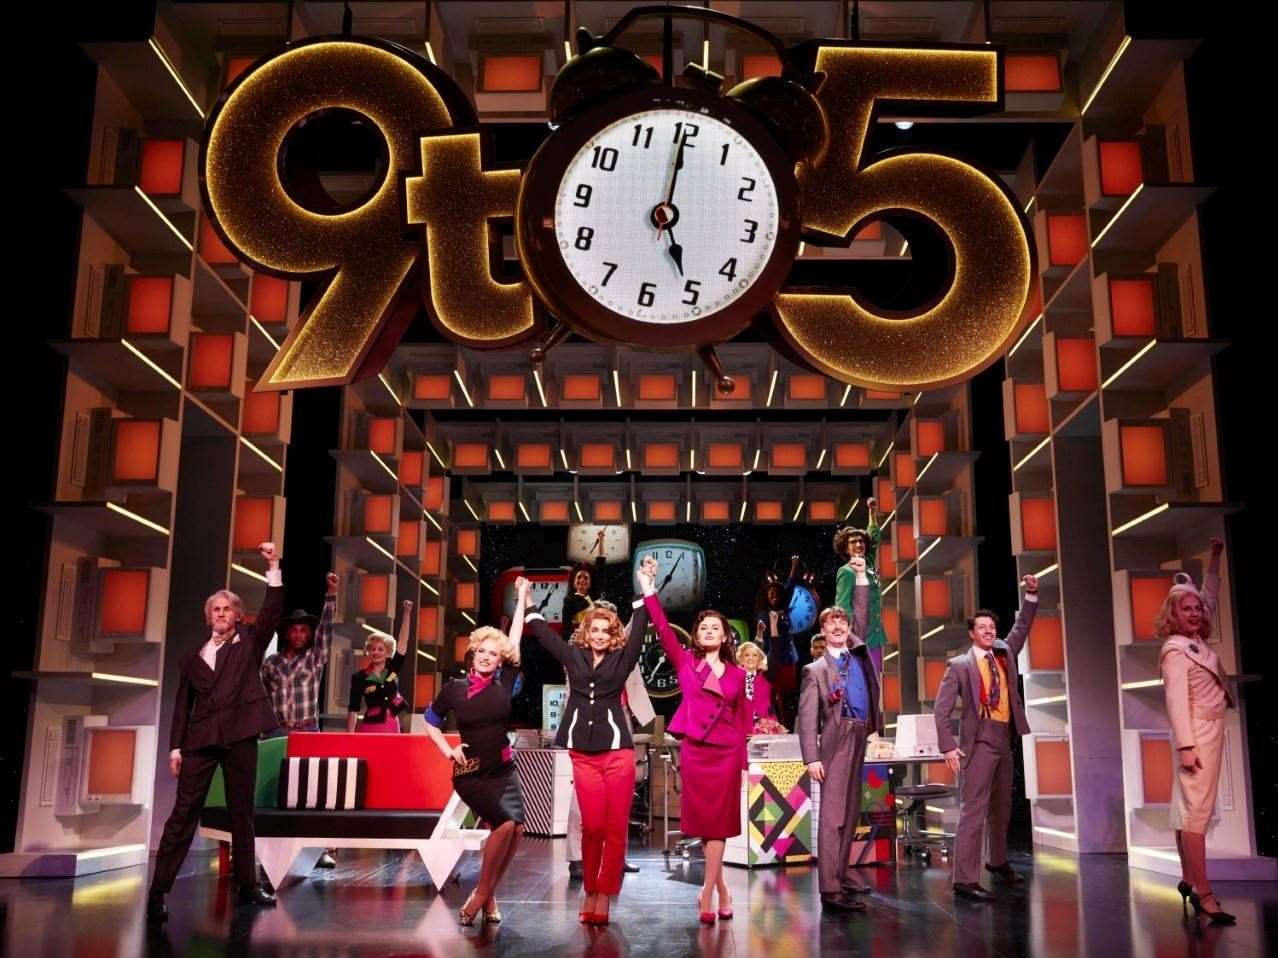 9 to 5 the Musical has a score by Dolly Parton